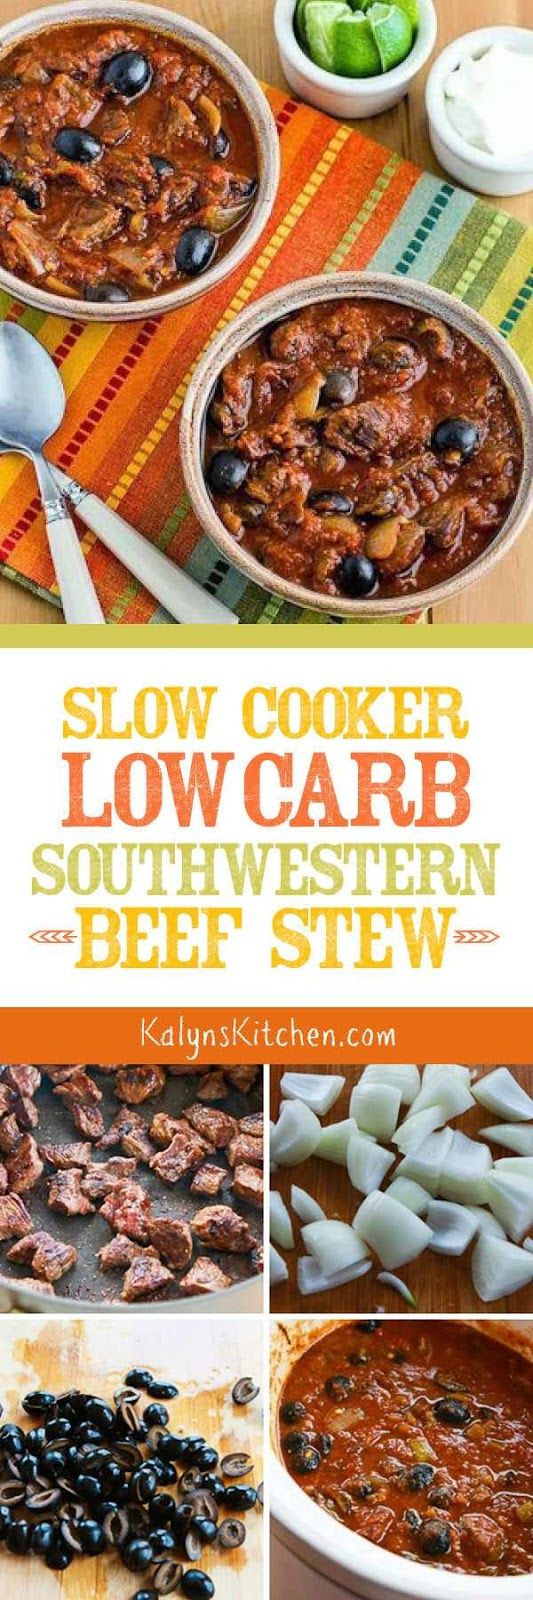 Low Carb Beef Stew Slow Cooker
 Slow Cooker Southwestern Beef Stew with Tomatoes Olives